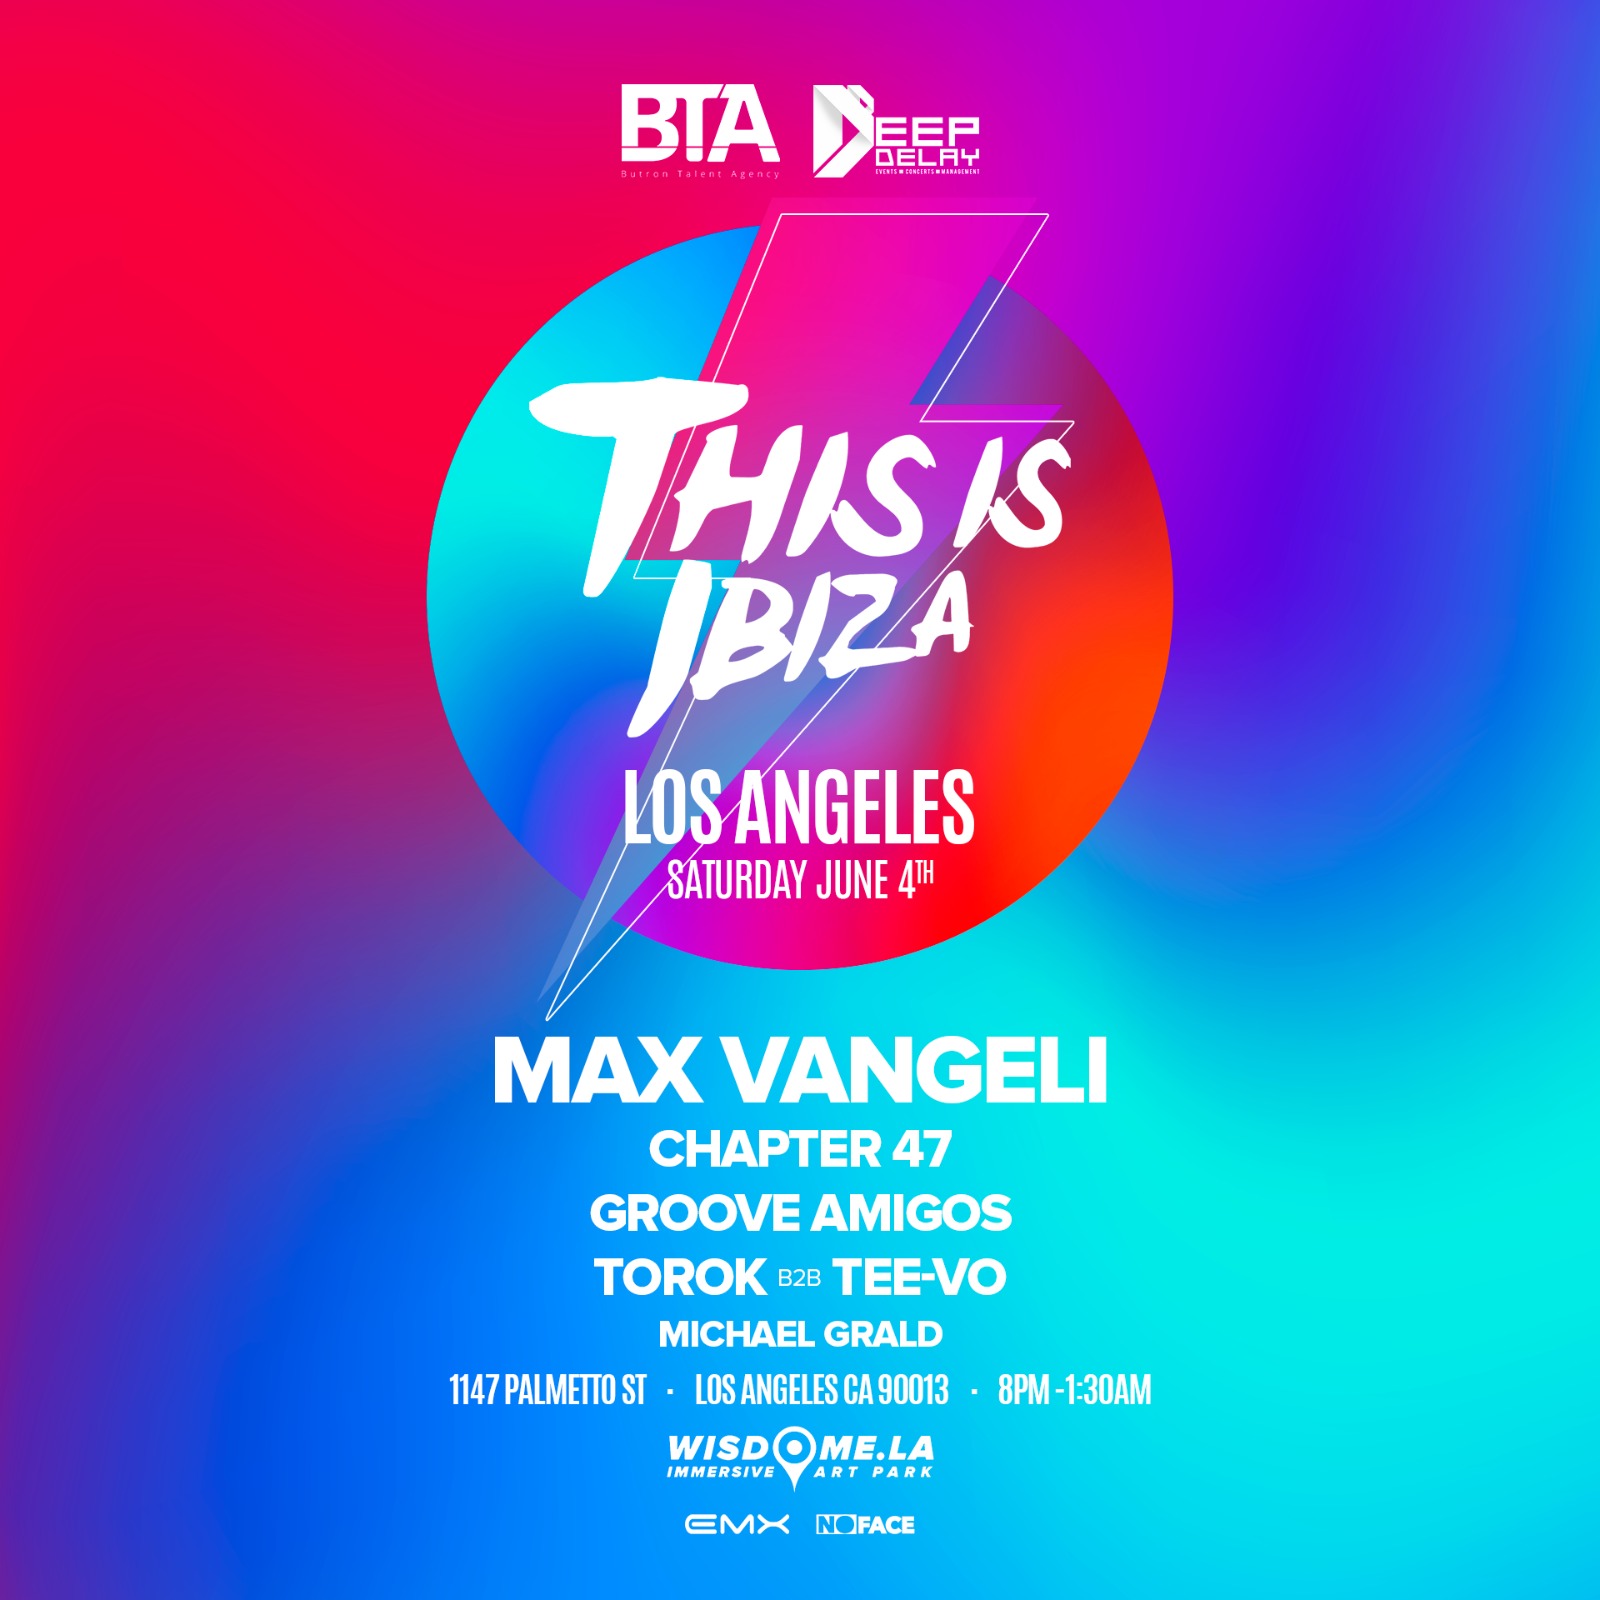 DEEP DELAY RETURNS TO THE USA WITH THIS IBIZA IN LA